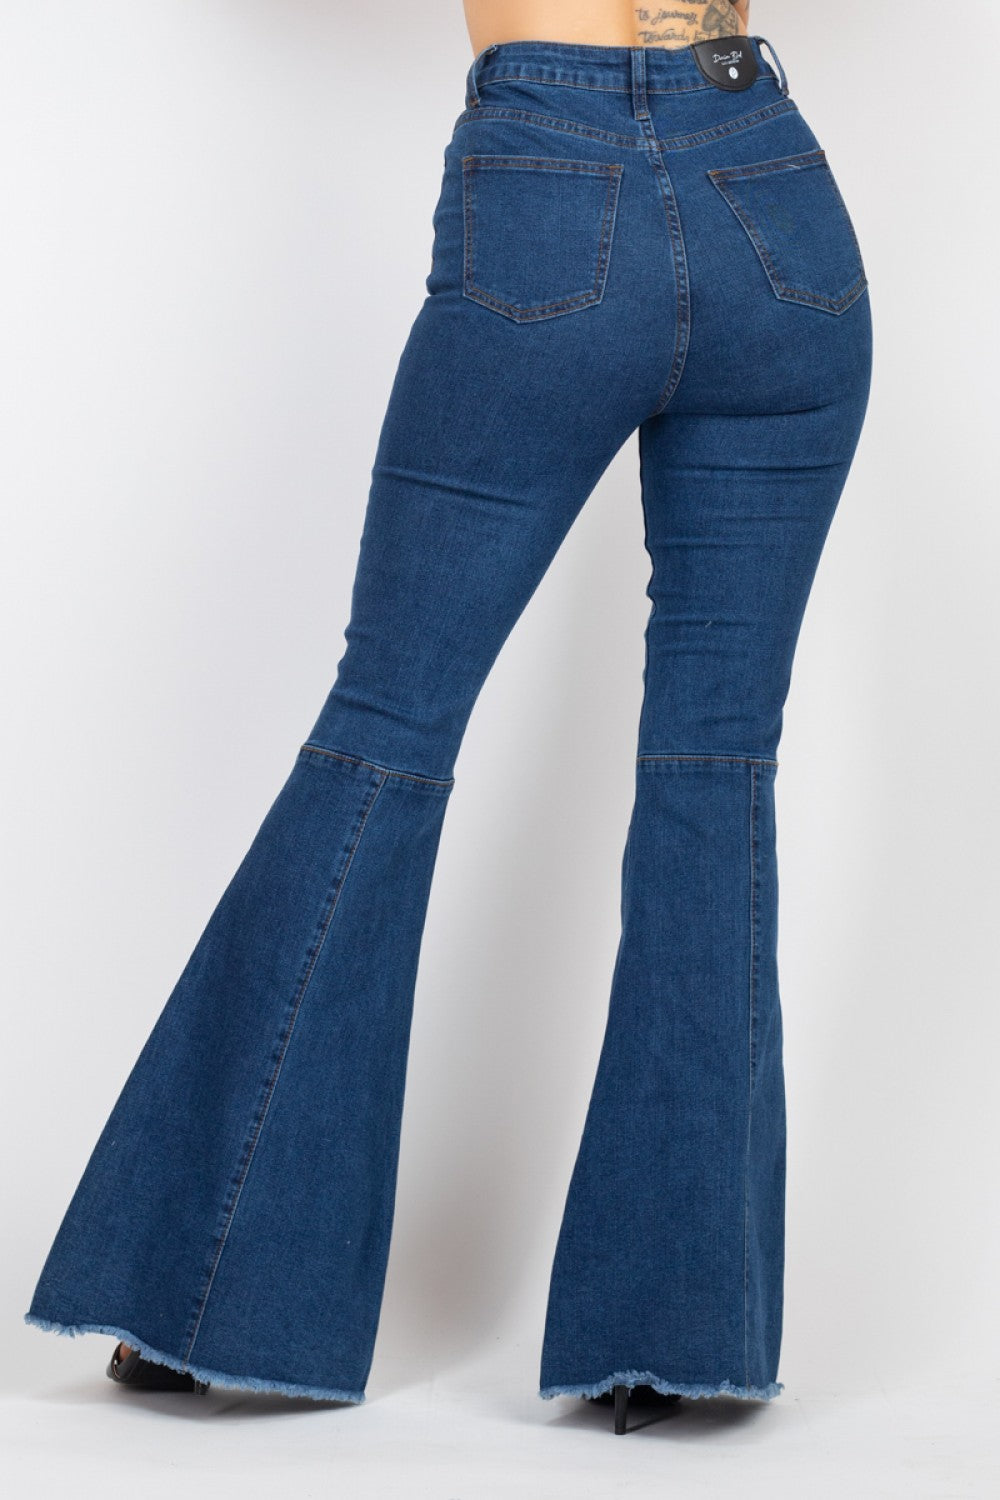 BELL BOTTOM JEANS DBP0842